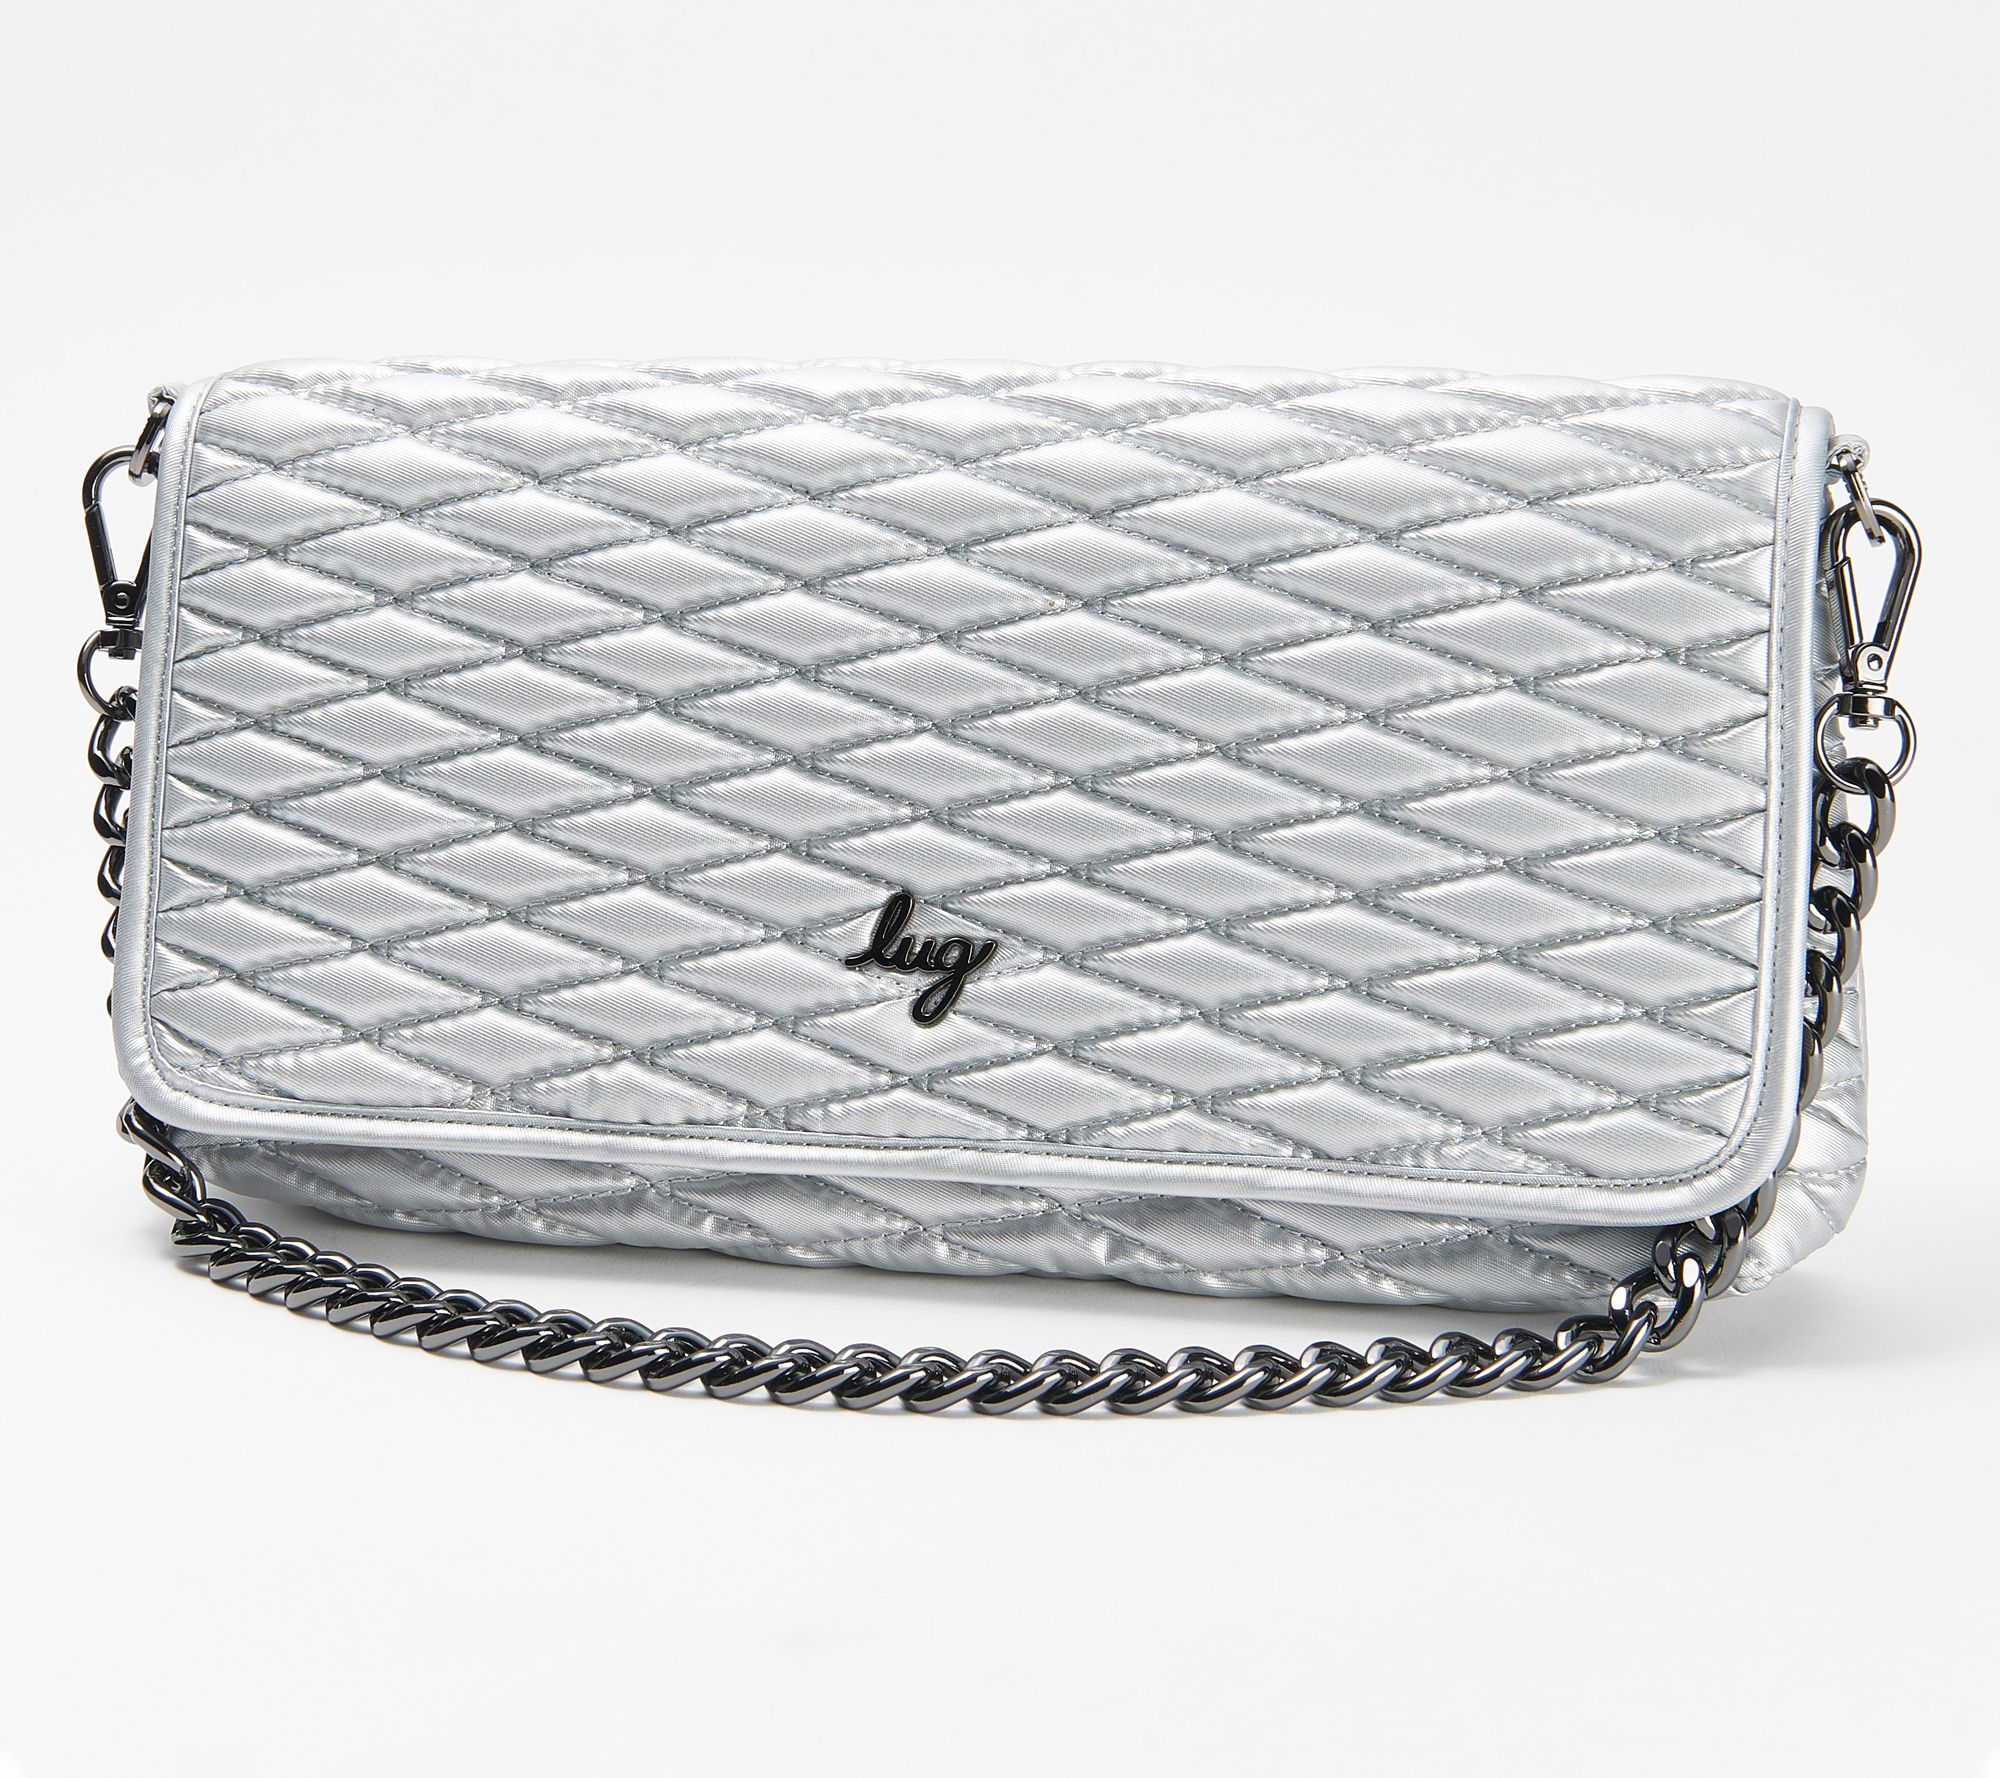 Lug Metallic Quilted Shoulder Bag with Chainstrap - Strut ,Metallic Silver